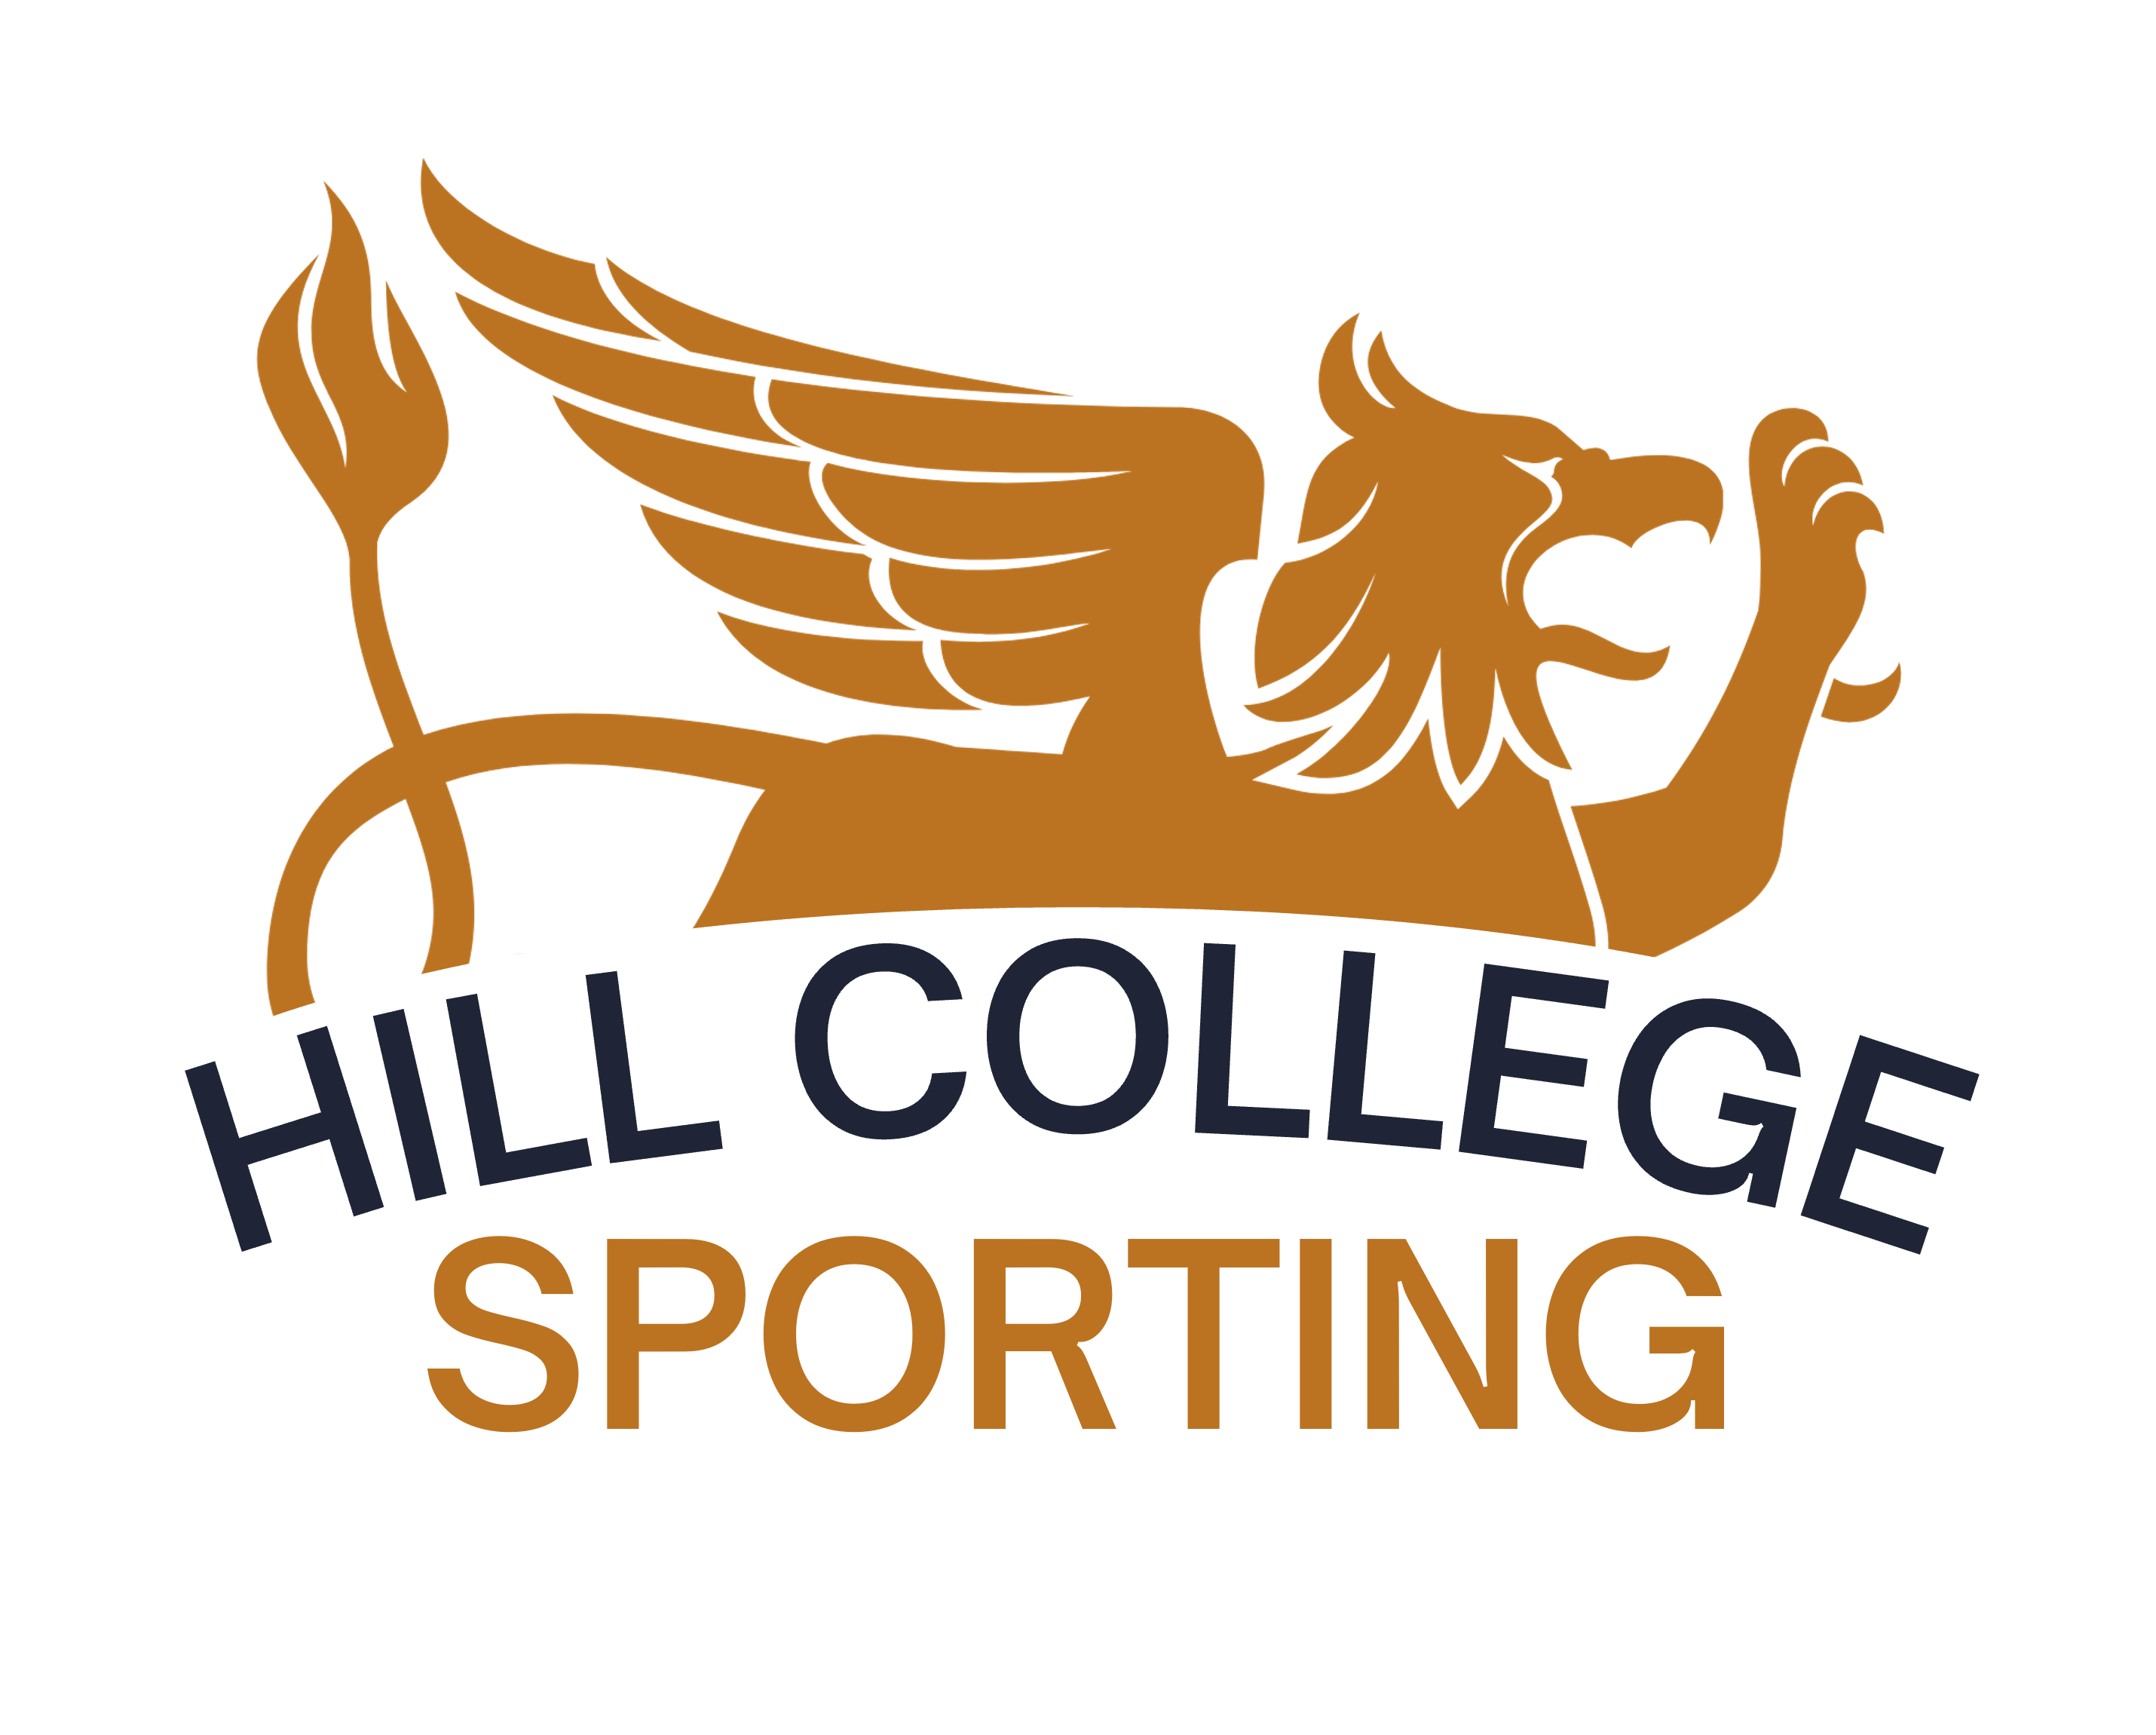 Hill College Sporting